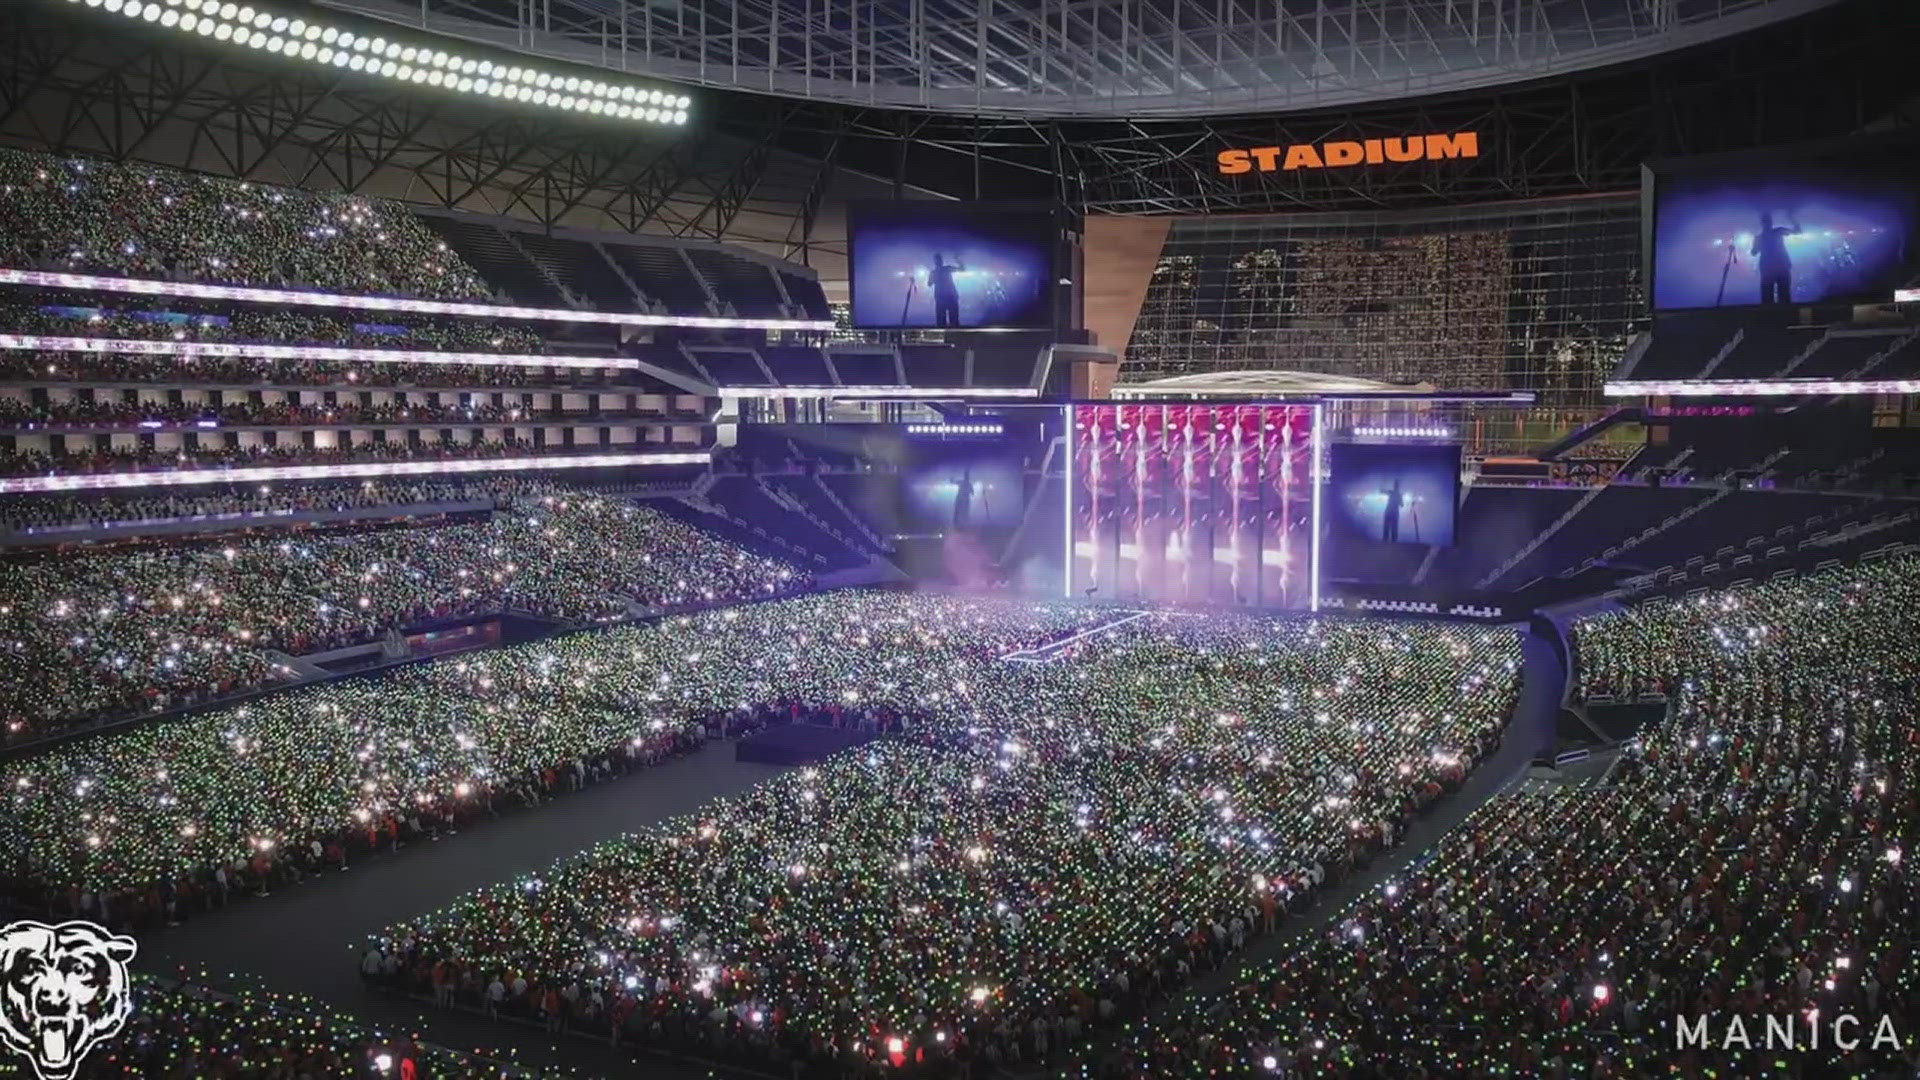 The Bears unveiled a nearly $5 billion plan calling for public funding last week for an enclosed facility to be built next to their longtime home at Soldier Field.